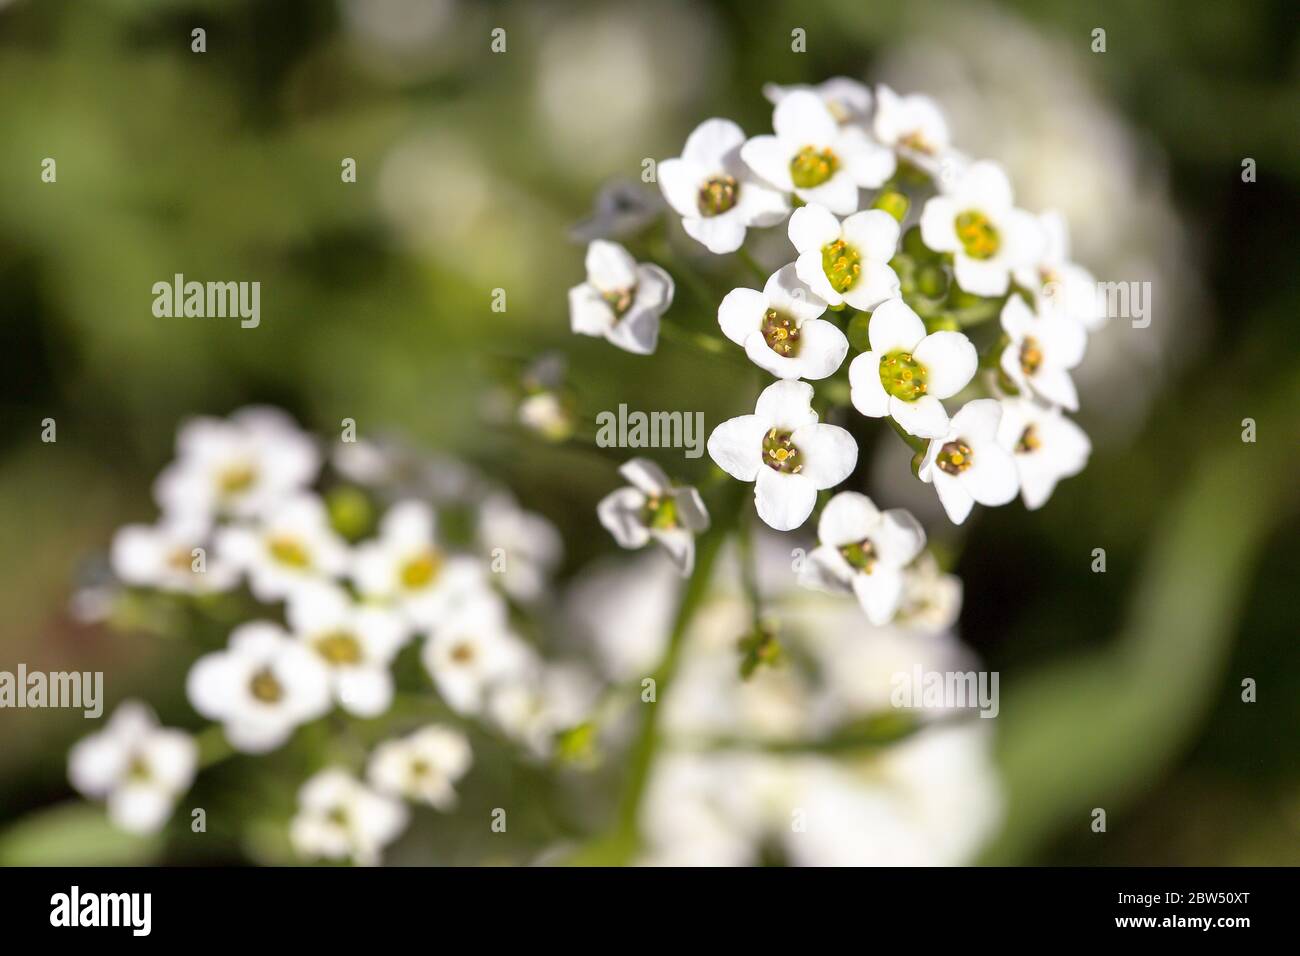 close-up image of tiny white flowers of Alyssum maritimum, common name sweet alyssum or sweet alison blooming in the backyard Stock Photo